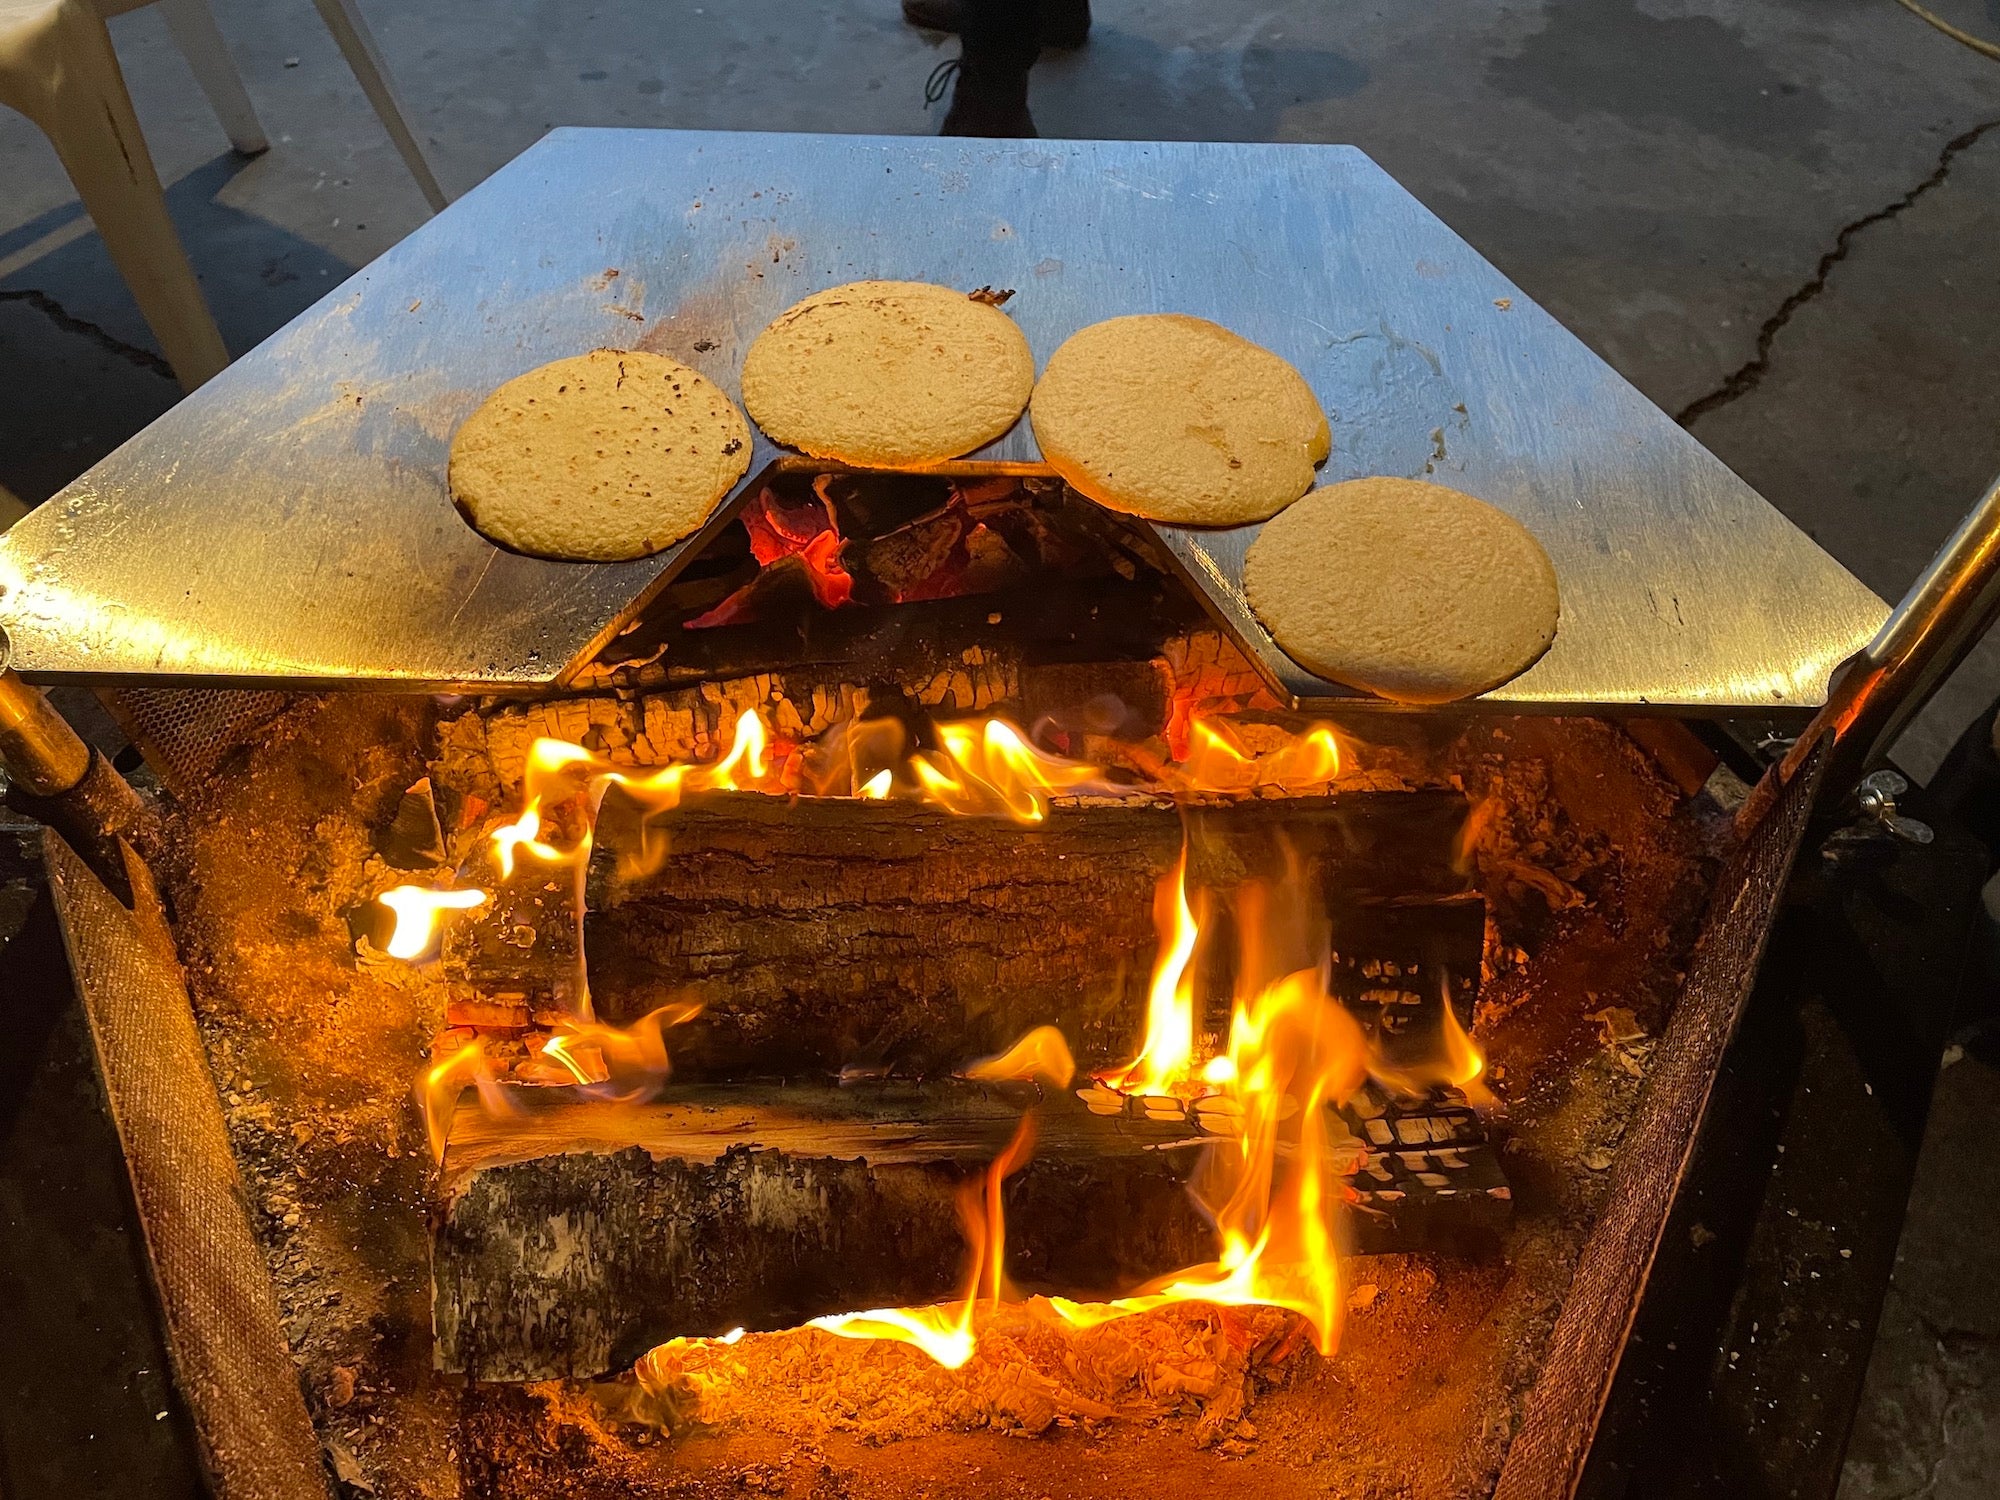  Four tortillas cooking on the Roasting plate accessory on a Kota Grill above a hot wood fire.      